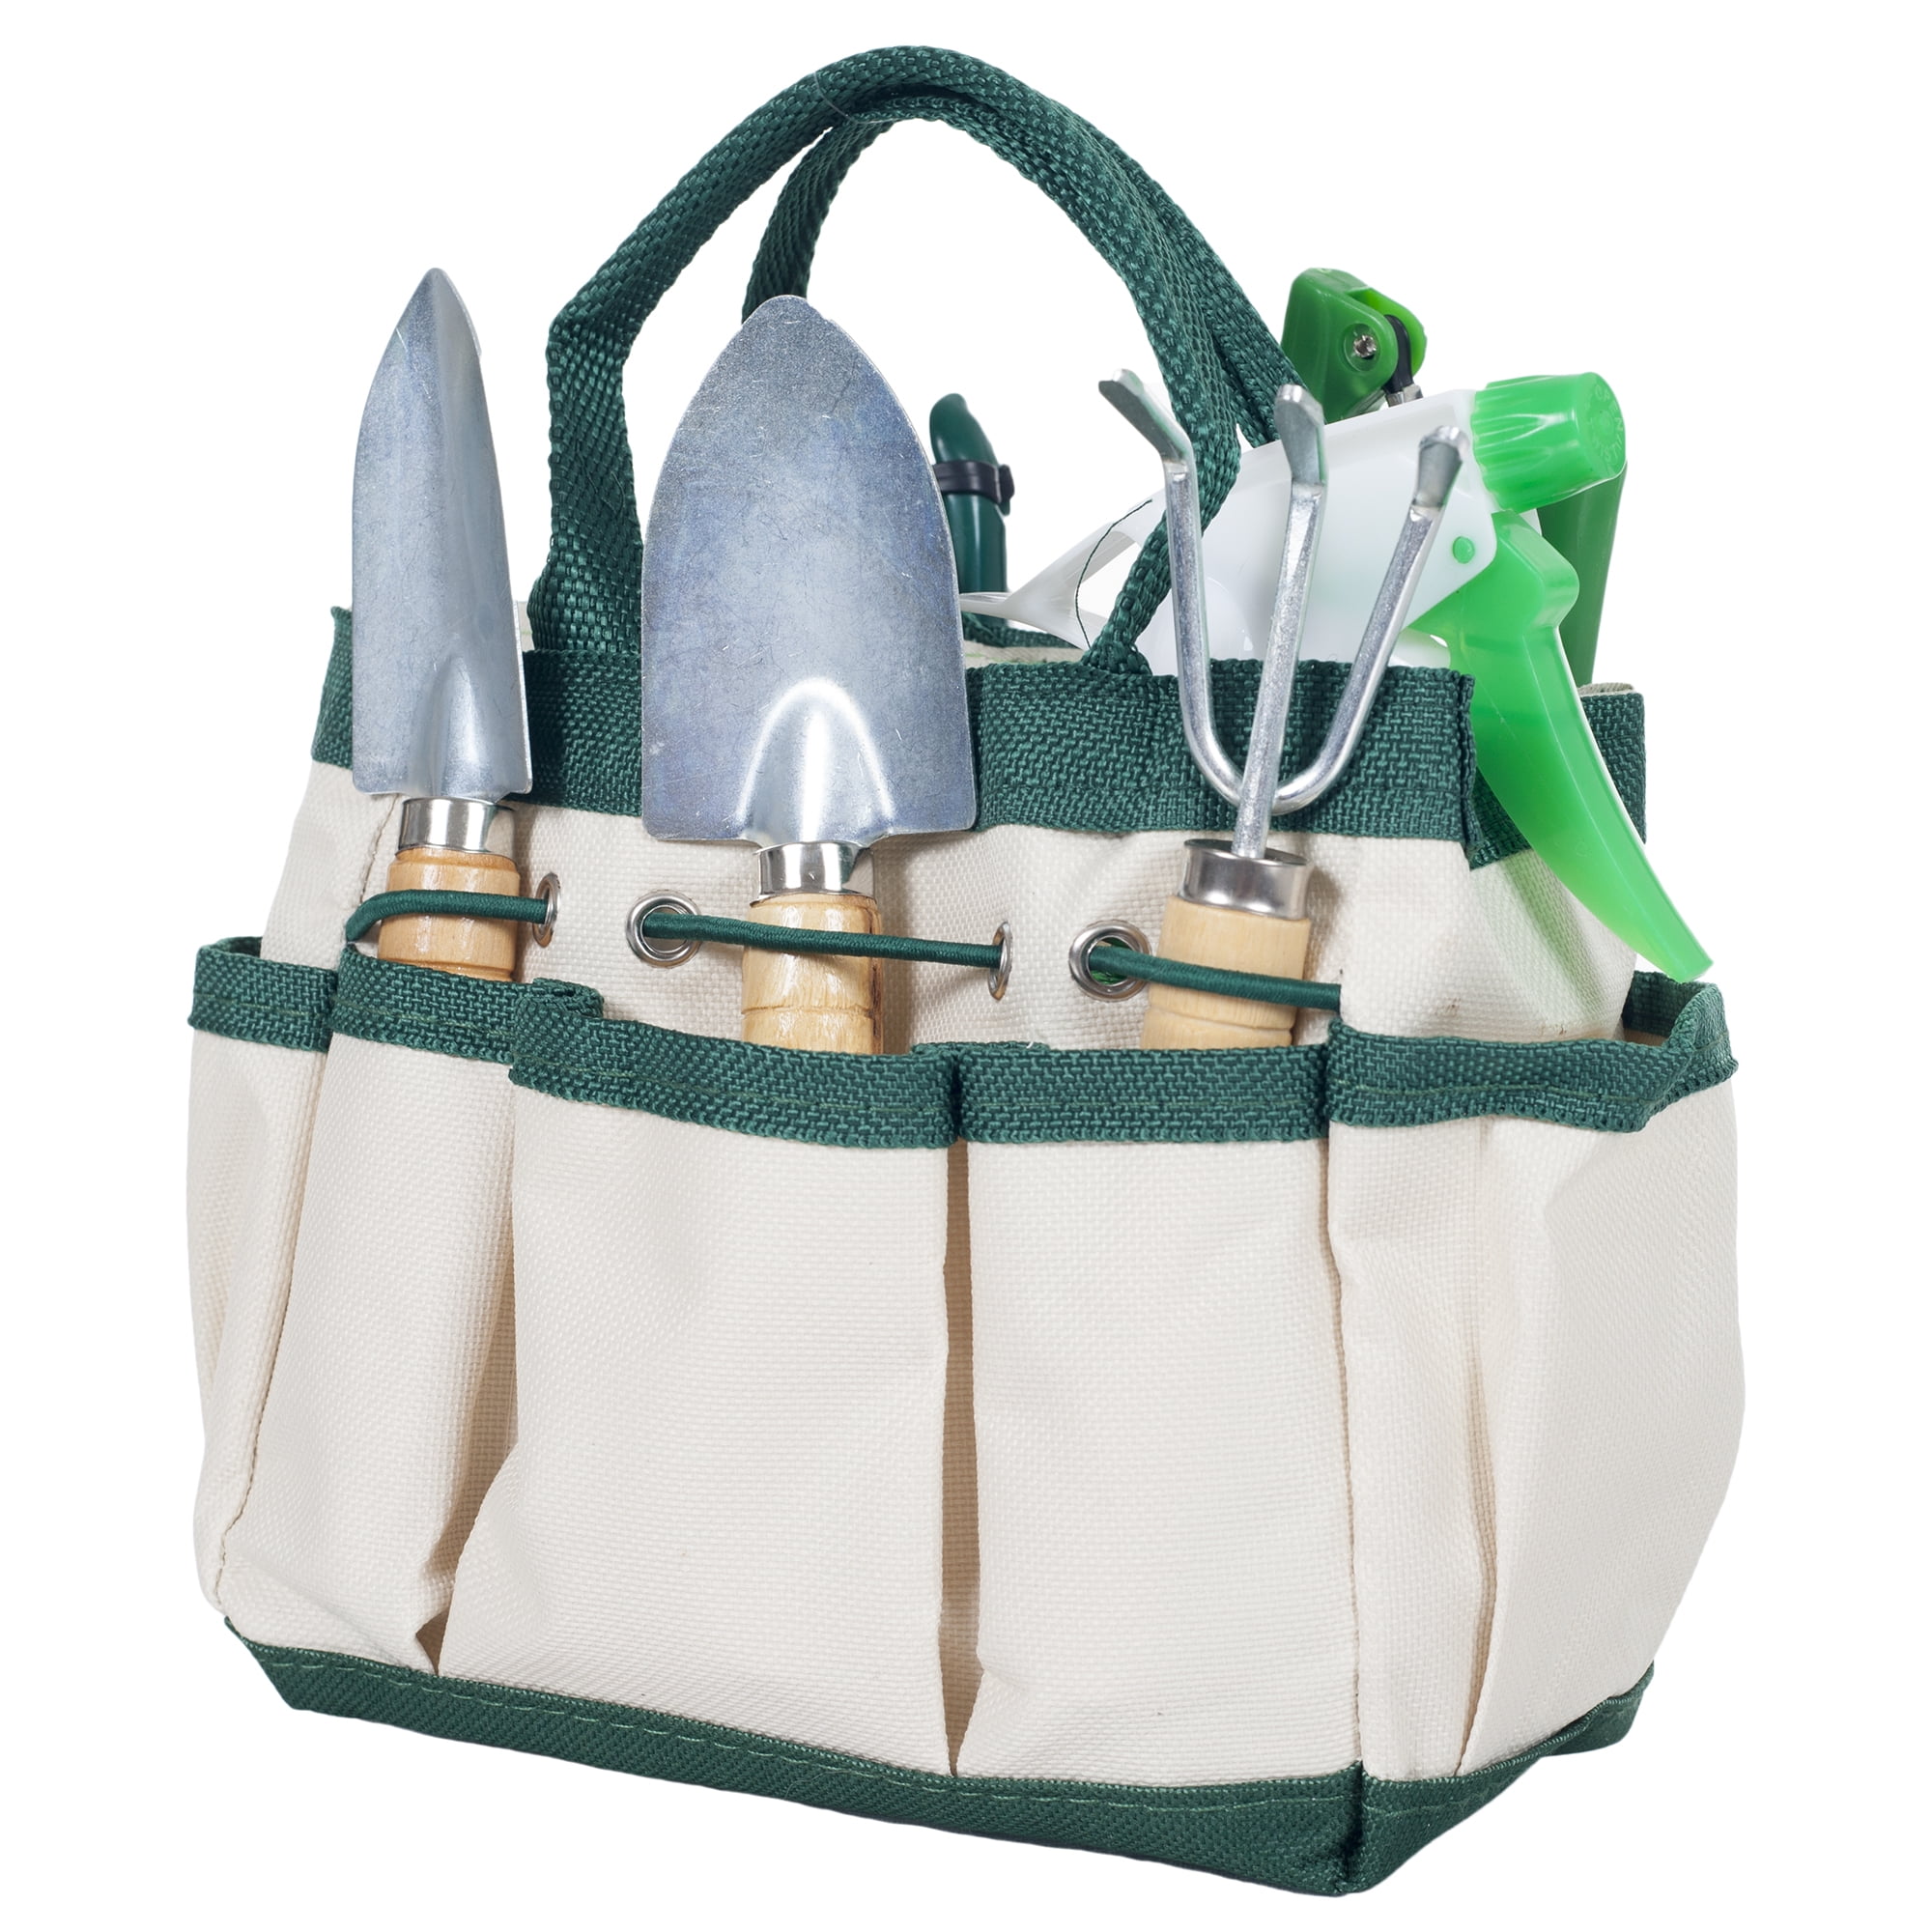 5-piece Garden Tool Set with Tote and Folding Seat - Walmart.com